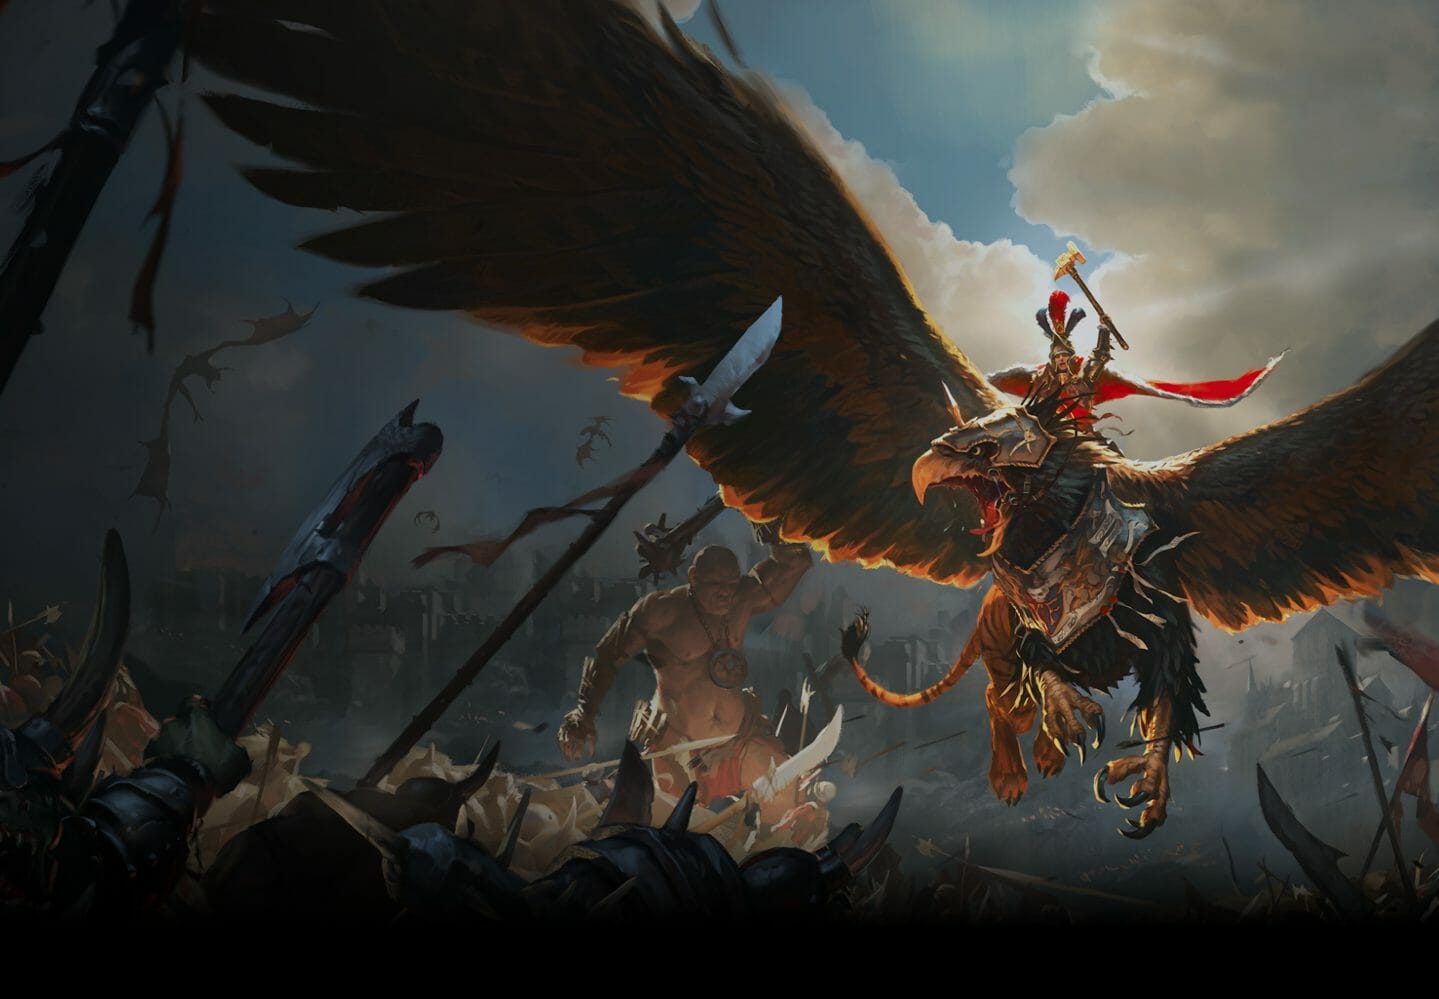 total warhammer how to download mods without steam workshop